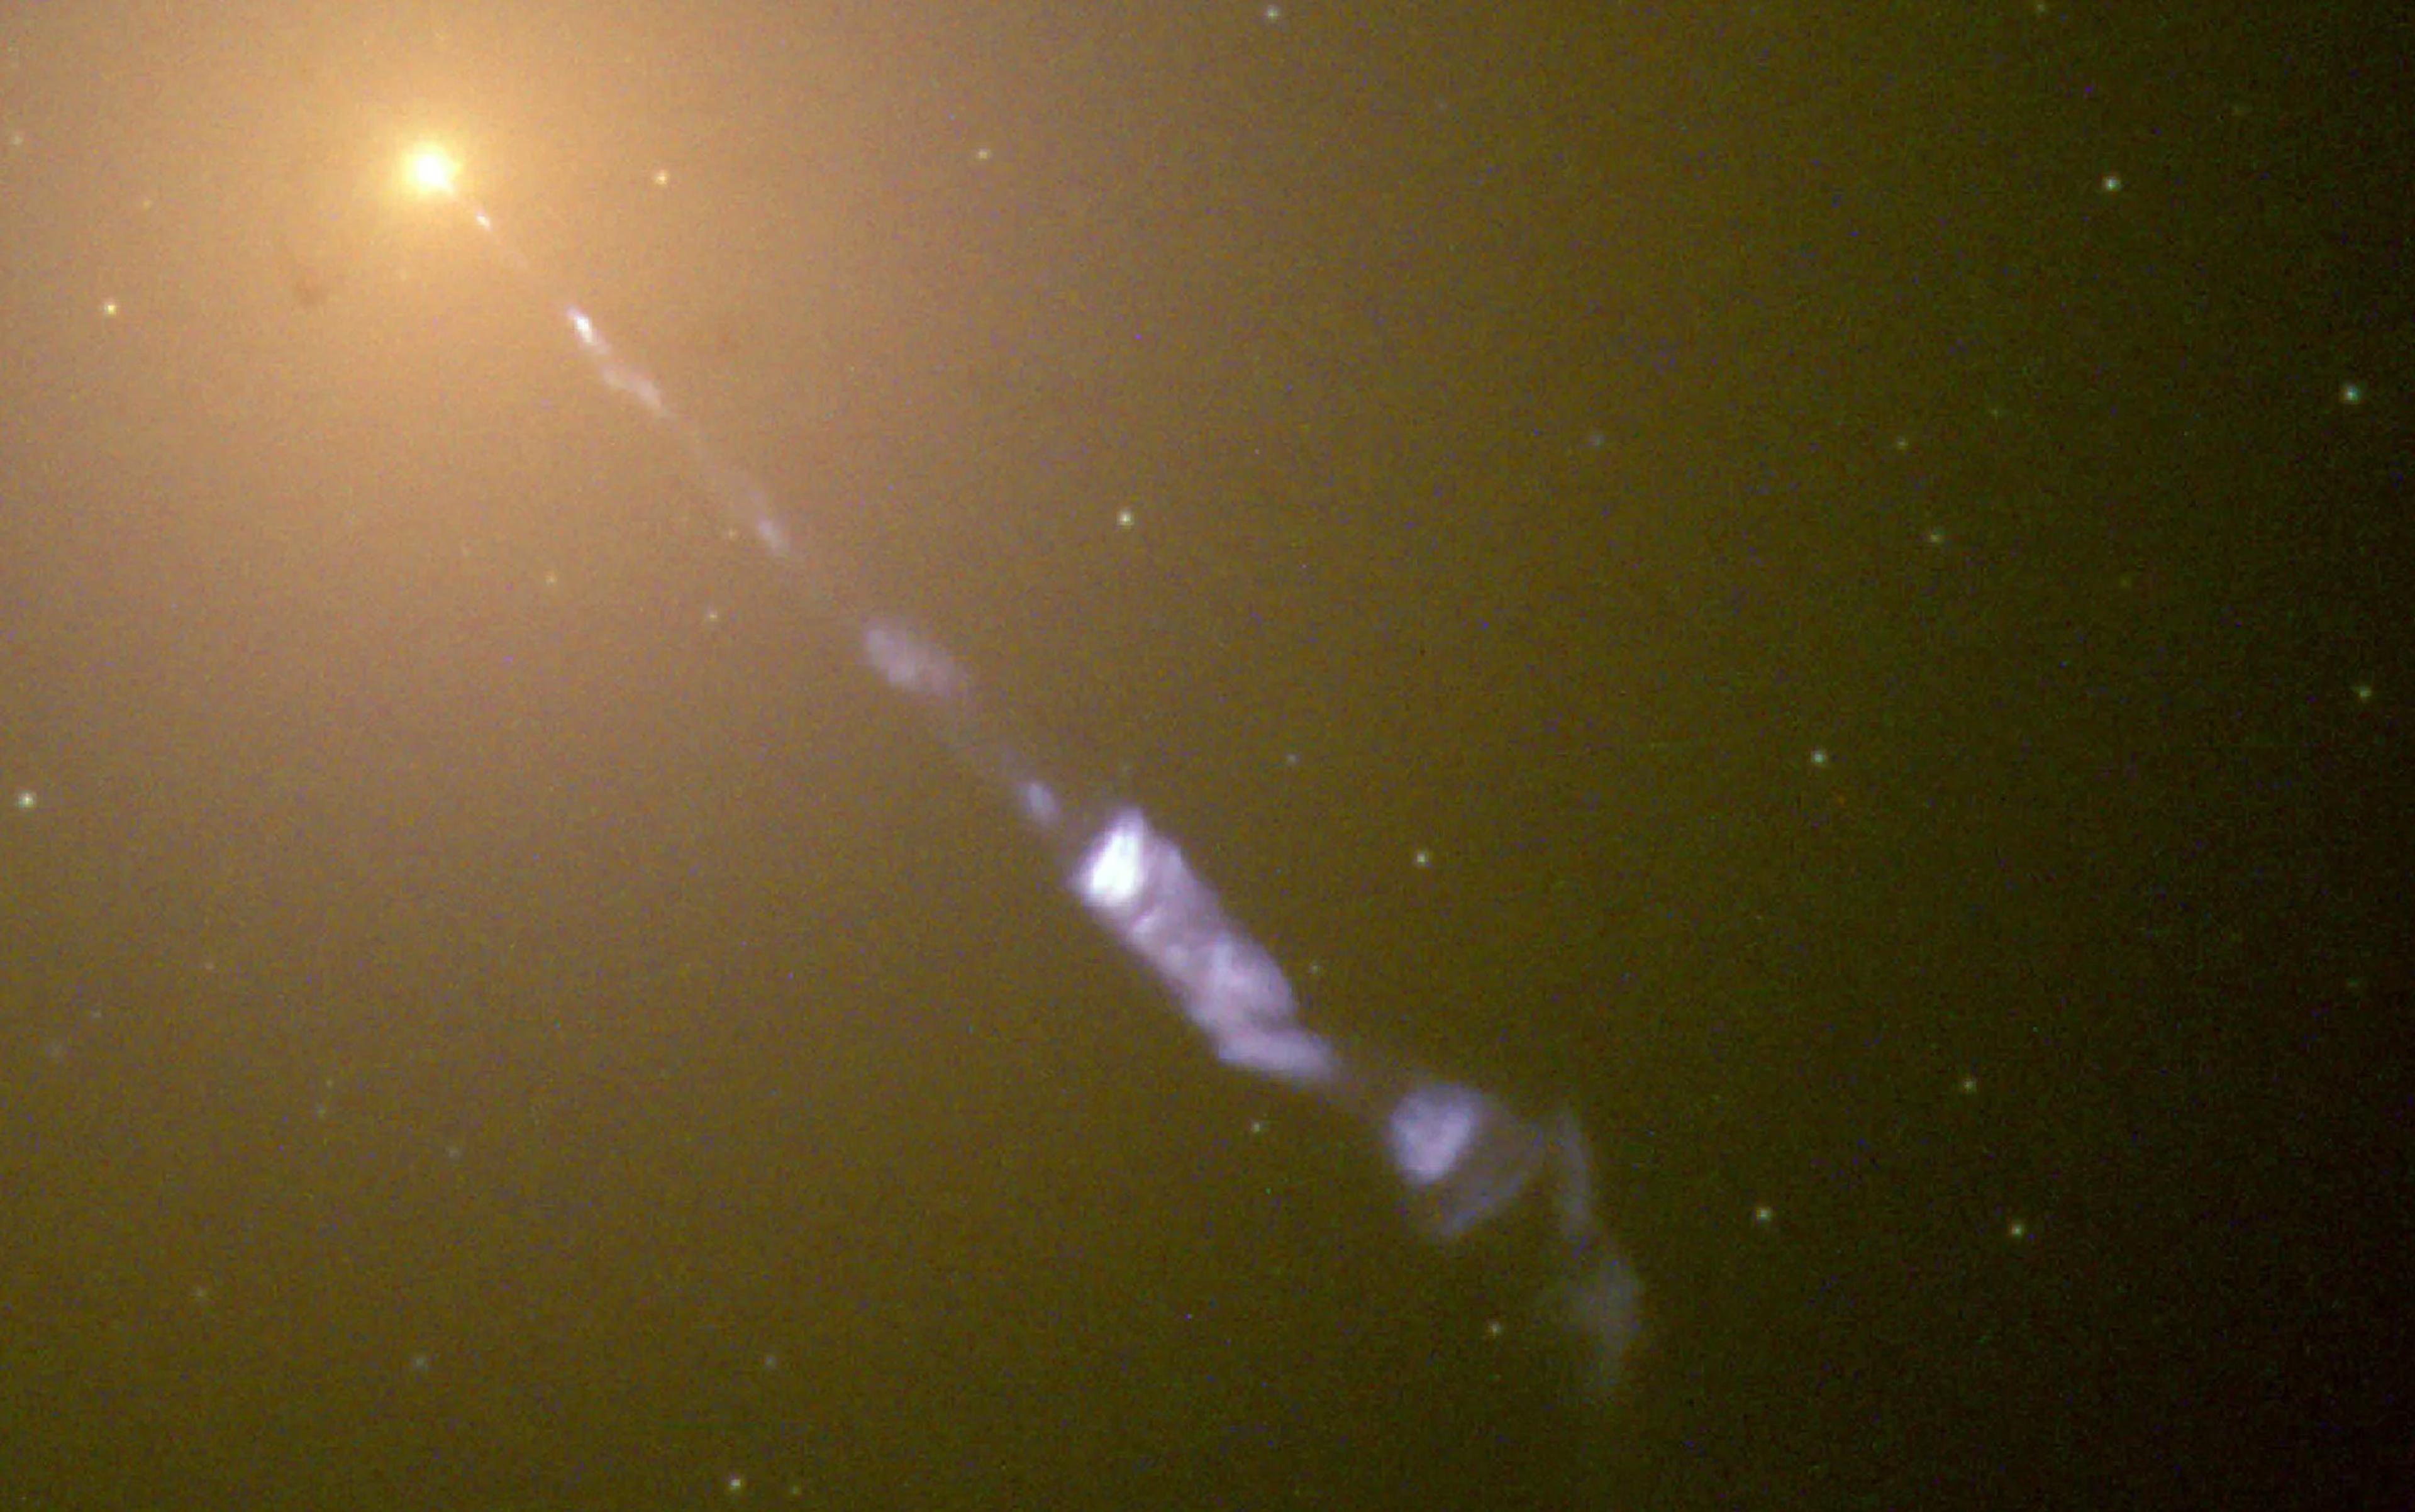 Image of M87 galaxy showing a bright yellowish central core with a jet of blue plasma extending outward into space. The background is filled with faint stars and a hazy, brownish hue